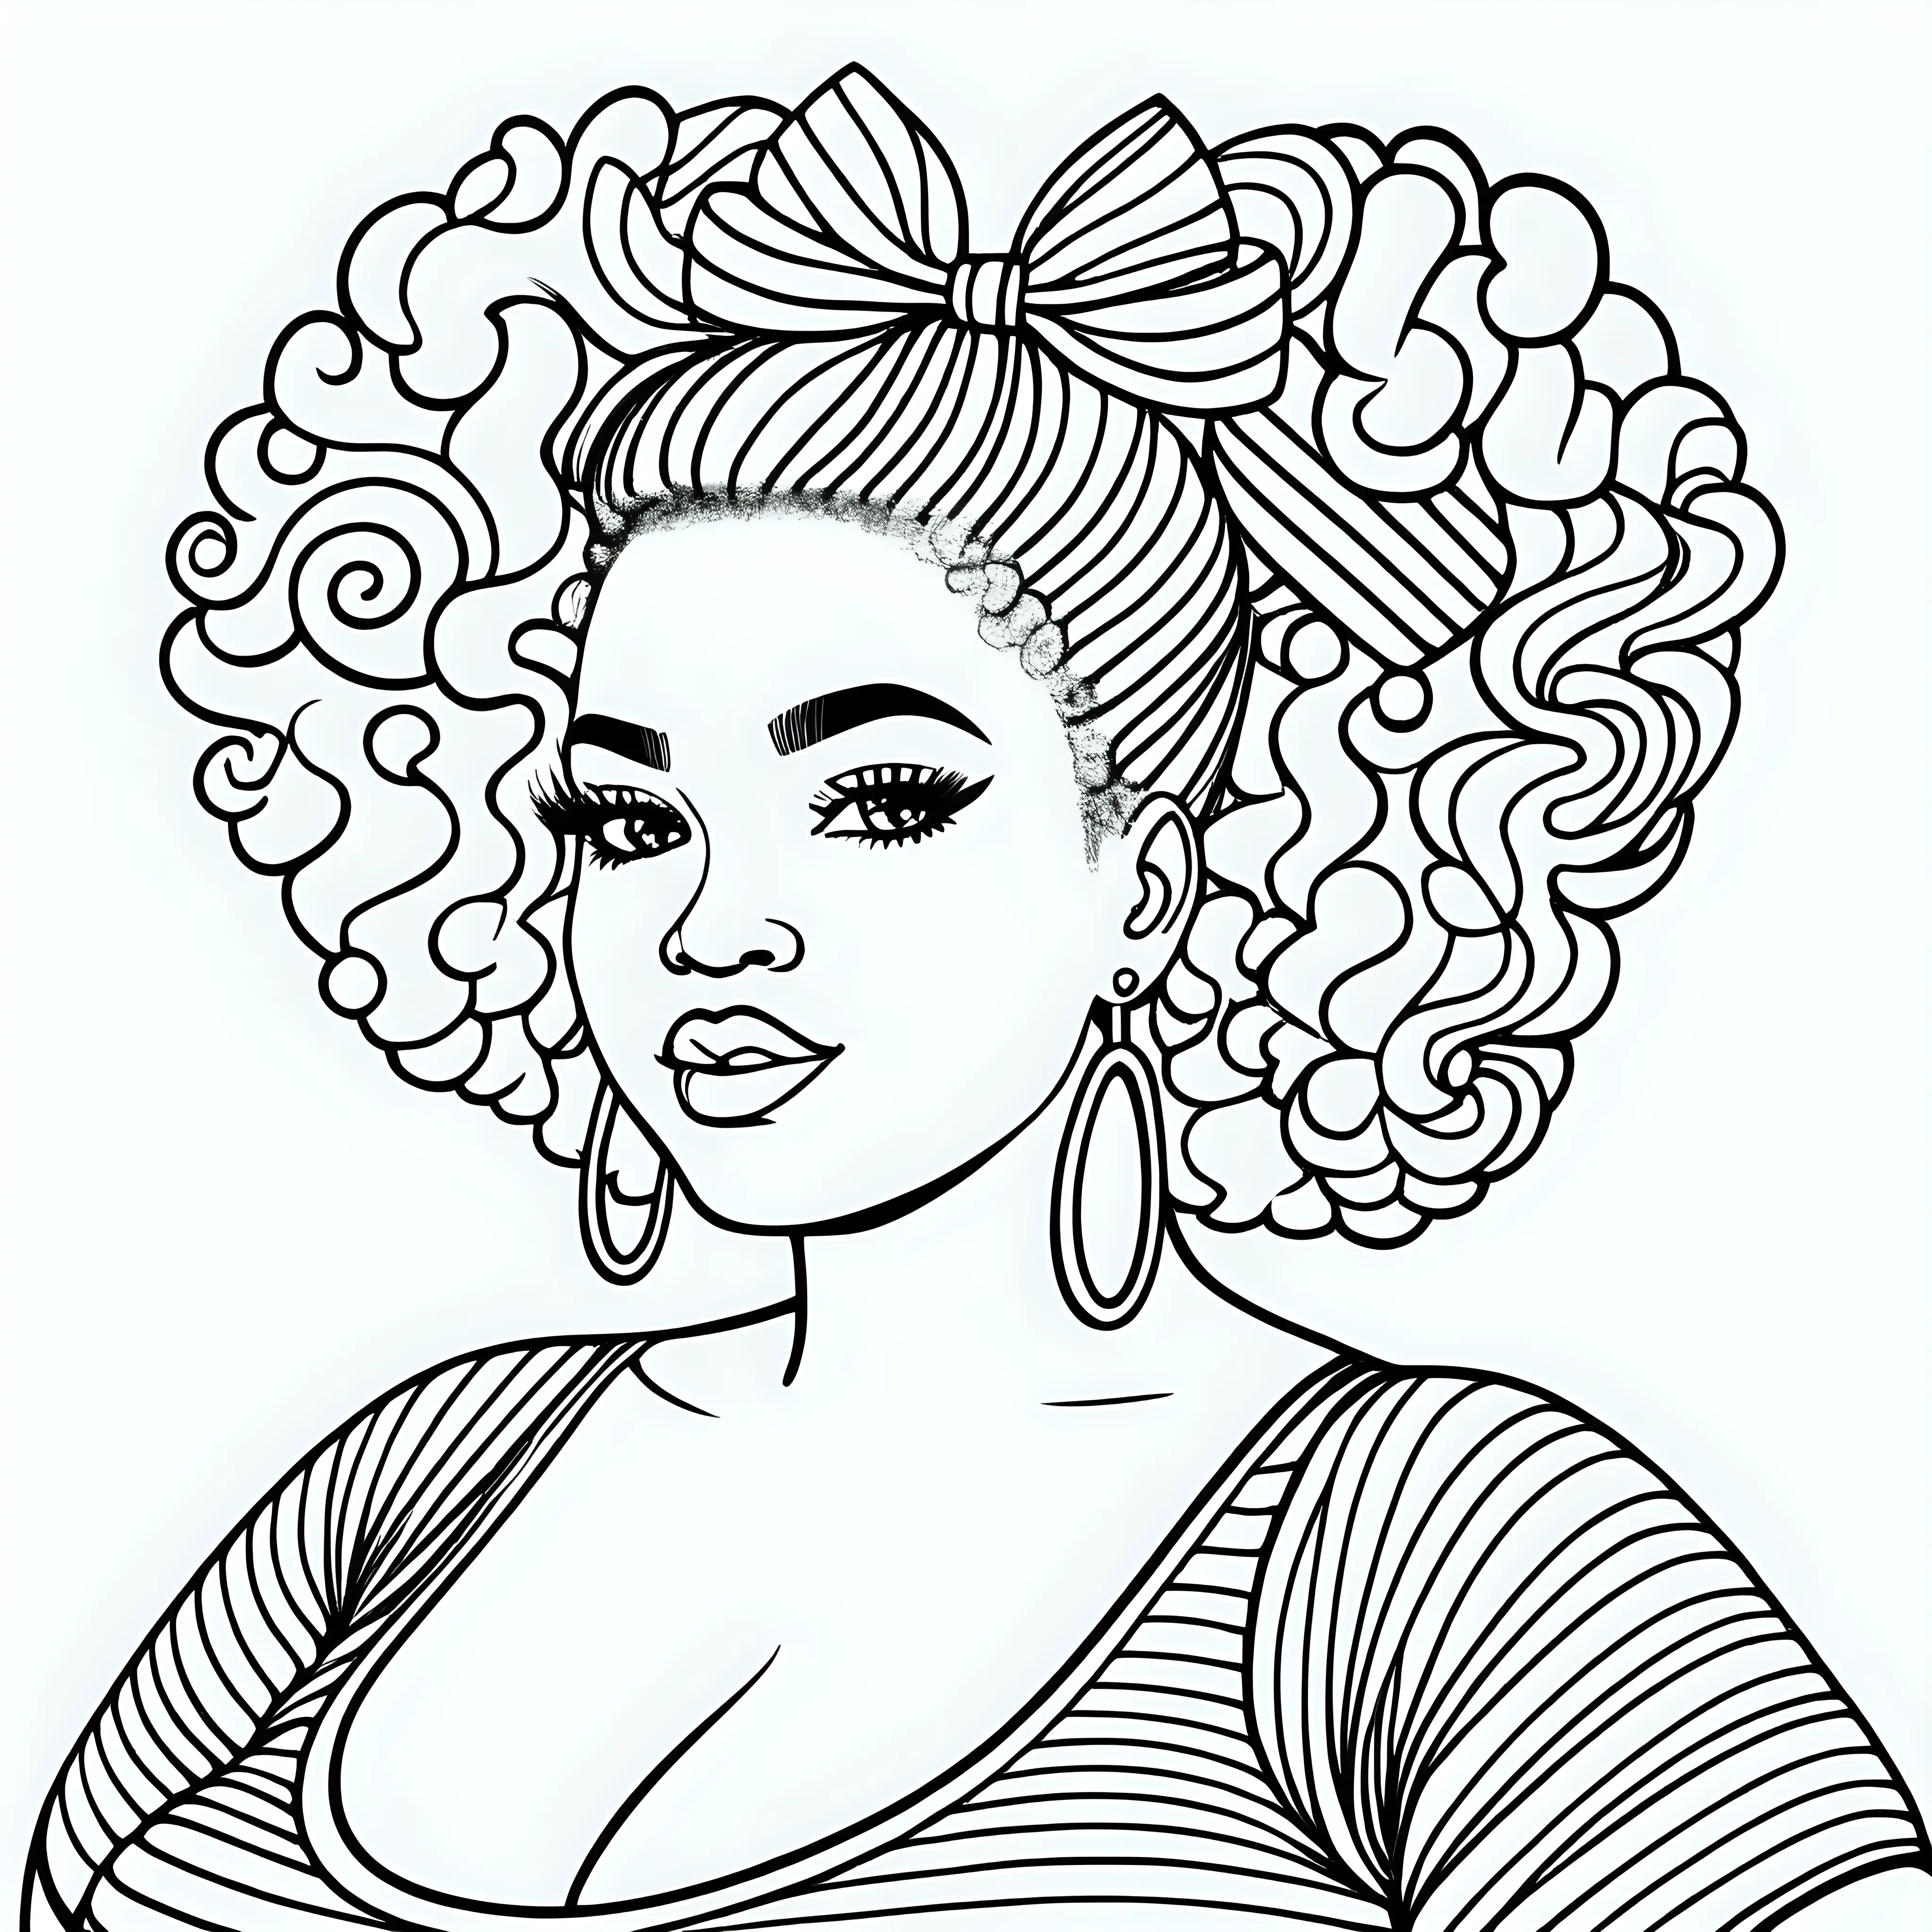 Curvy Plus Size Black Woman with CandyInspired Hair Accessories in Lisa Frank Style